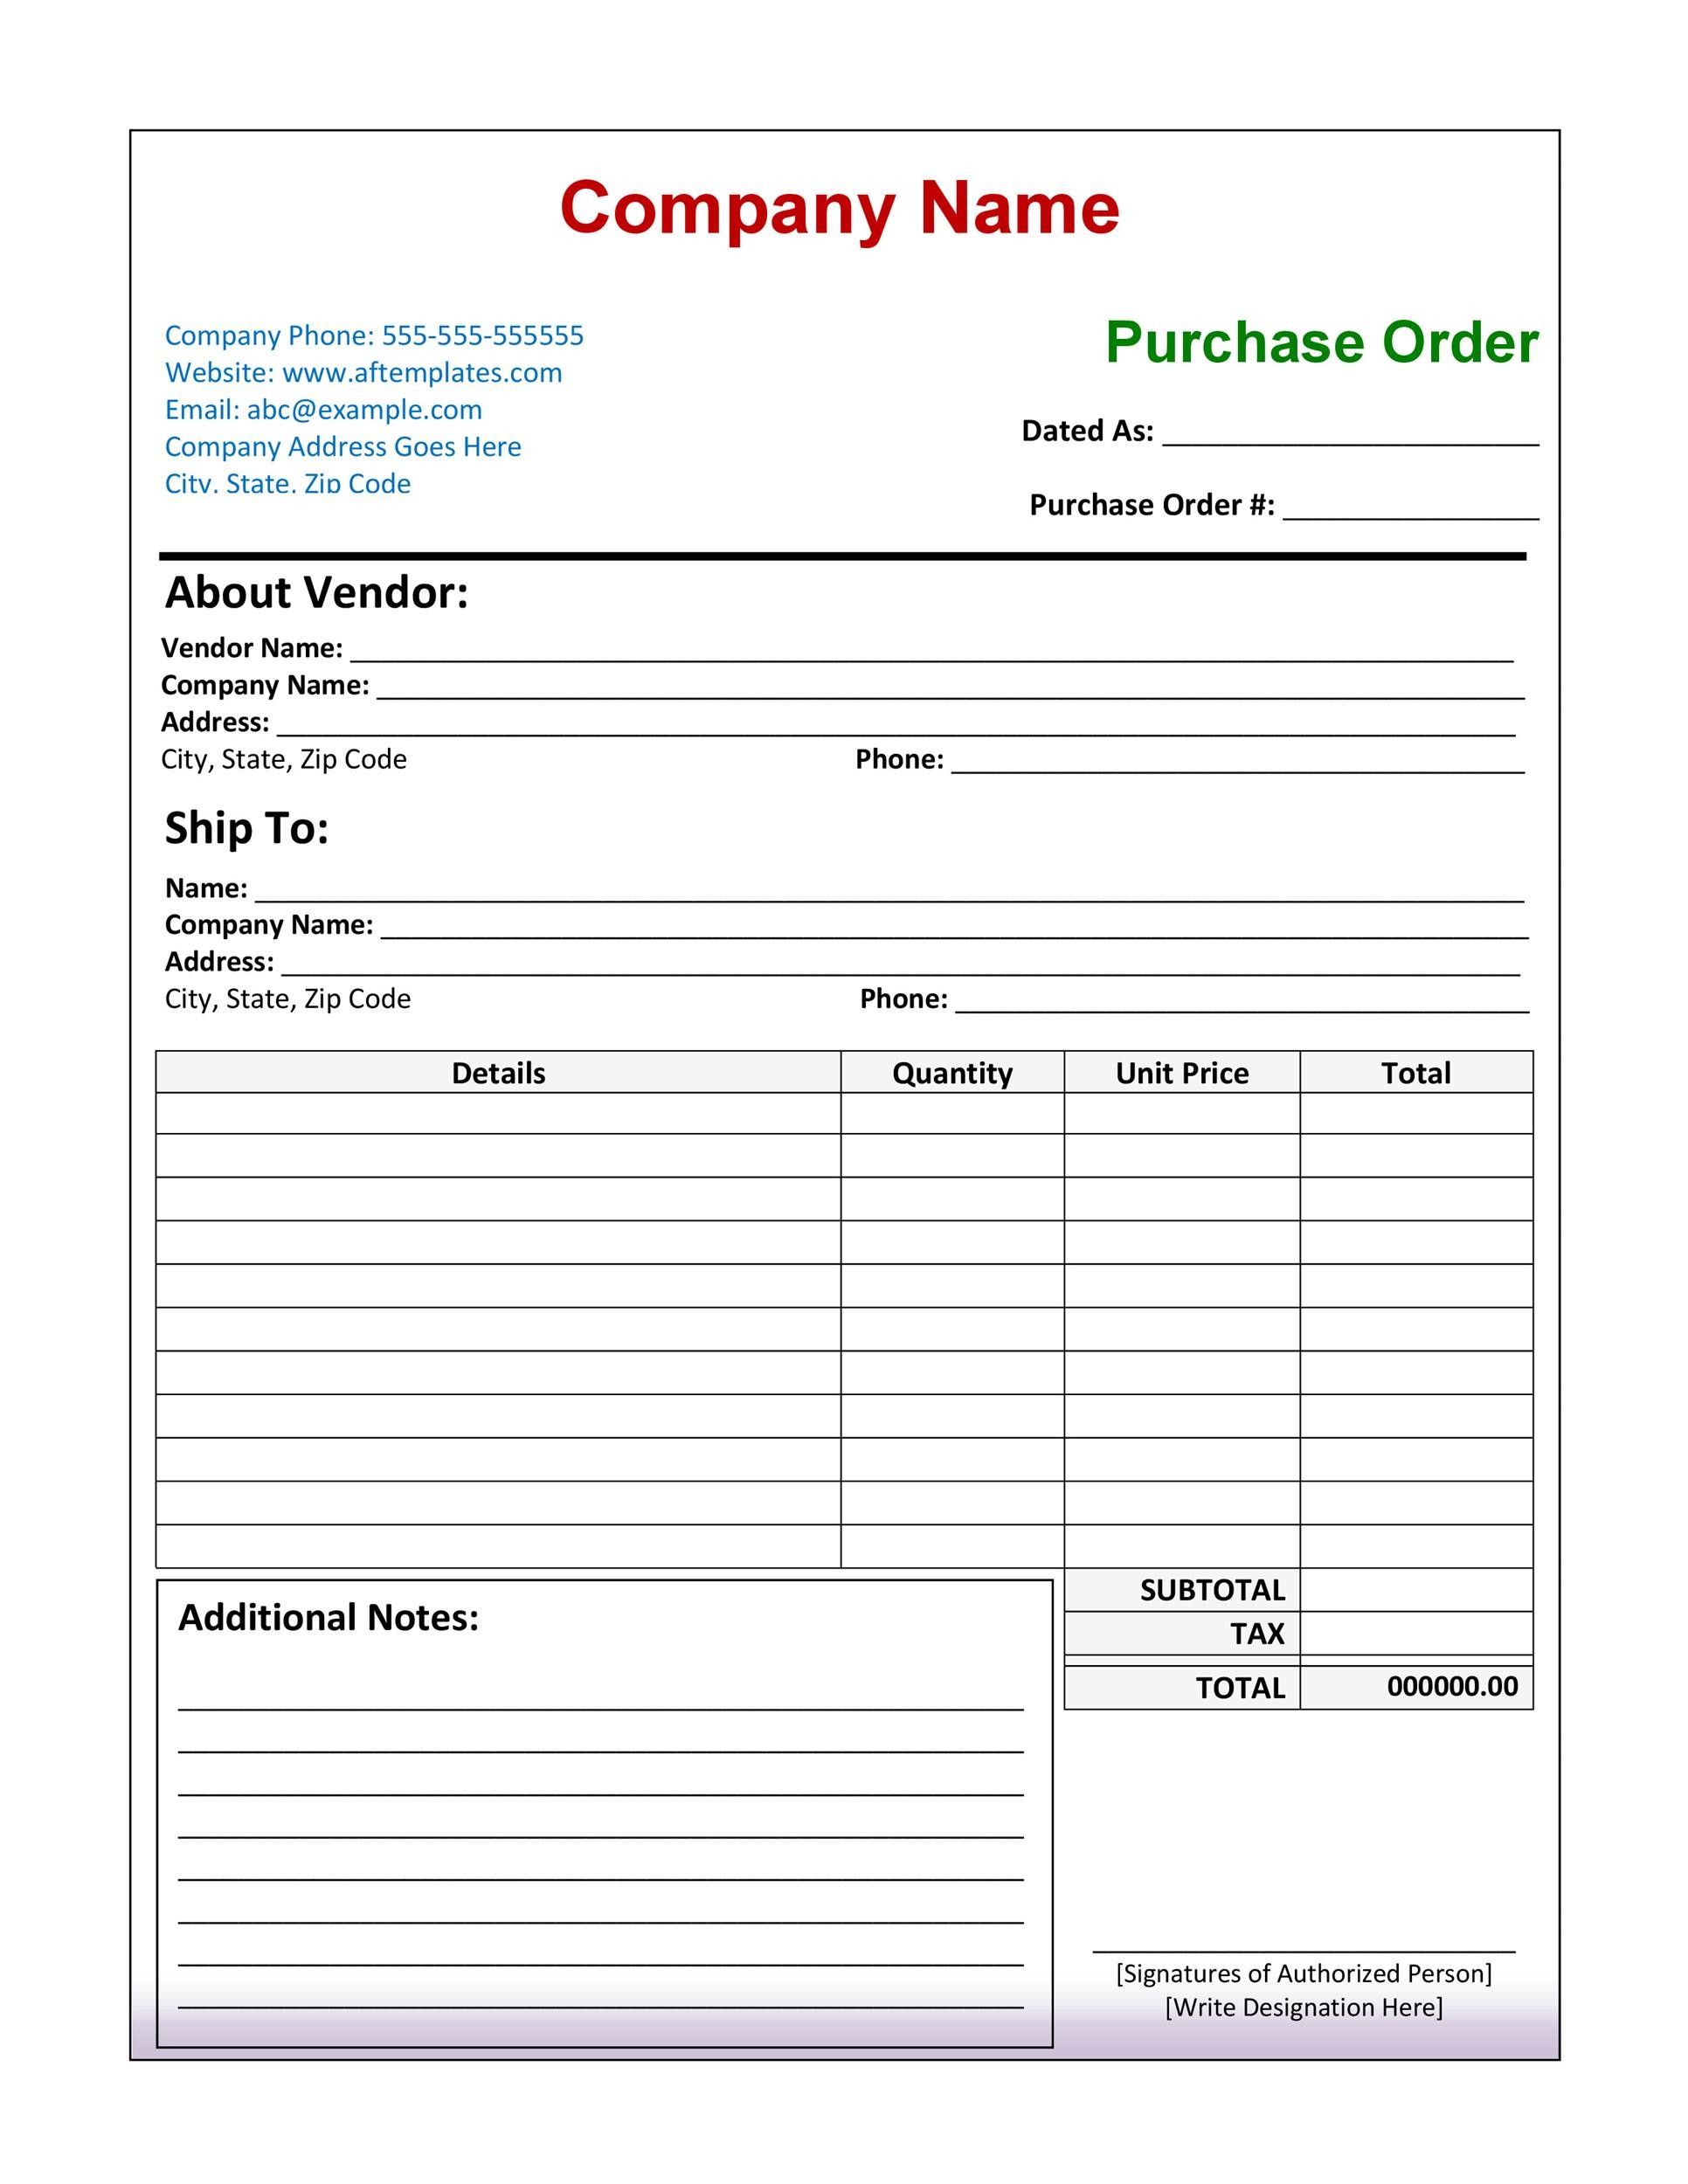 Purchase Order Template Excel Free